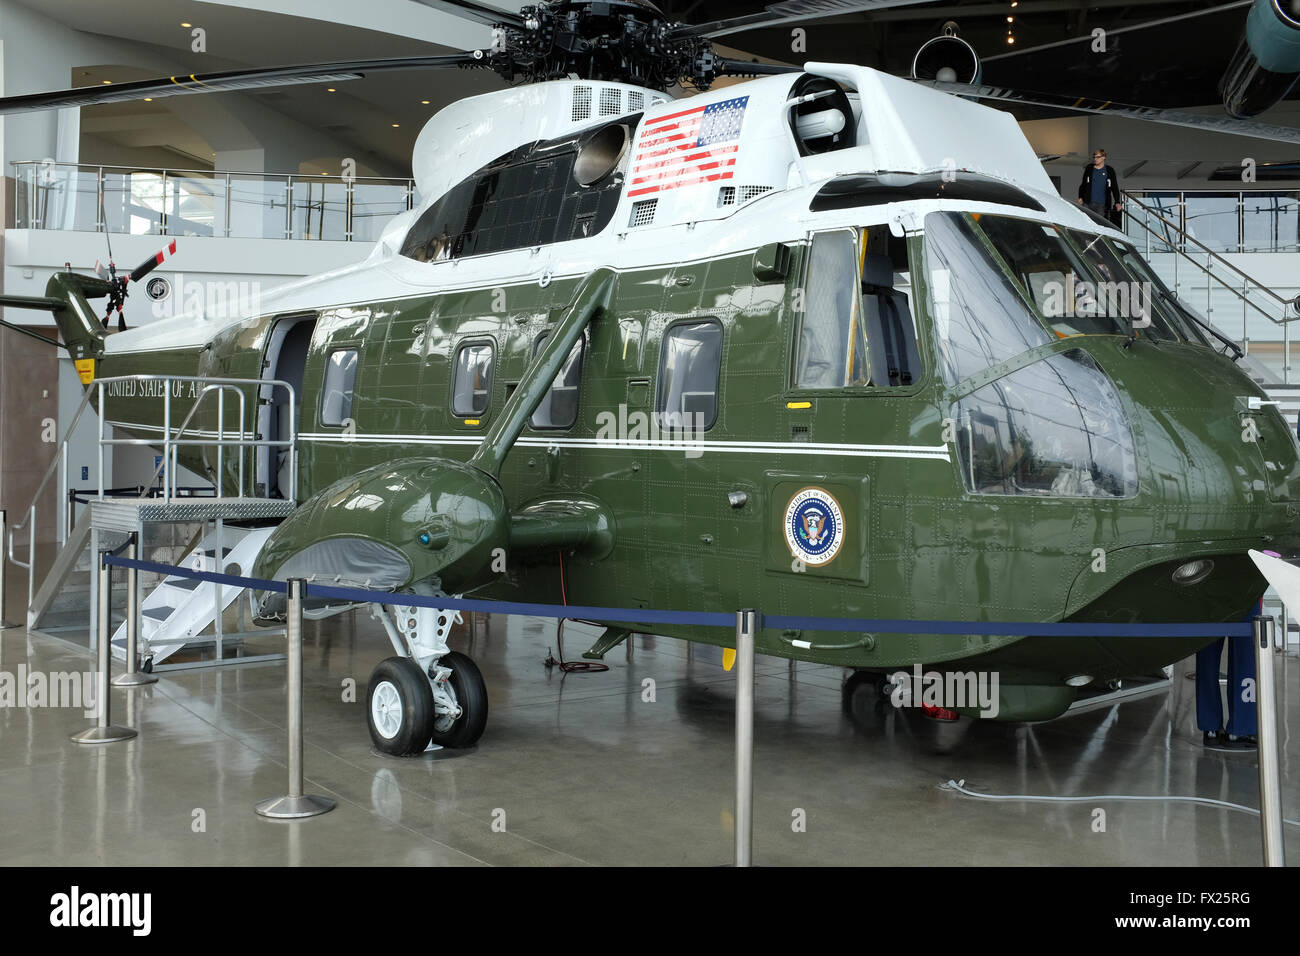 Une force maritime dans la Ronald Reagan Presidential Library and Museum, Simi Valley, Californie Banque D'Images